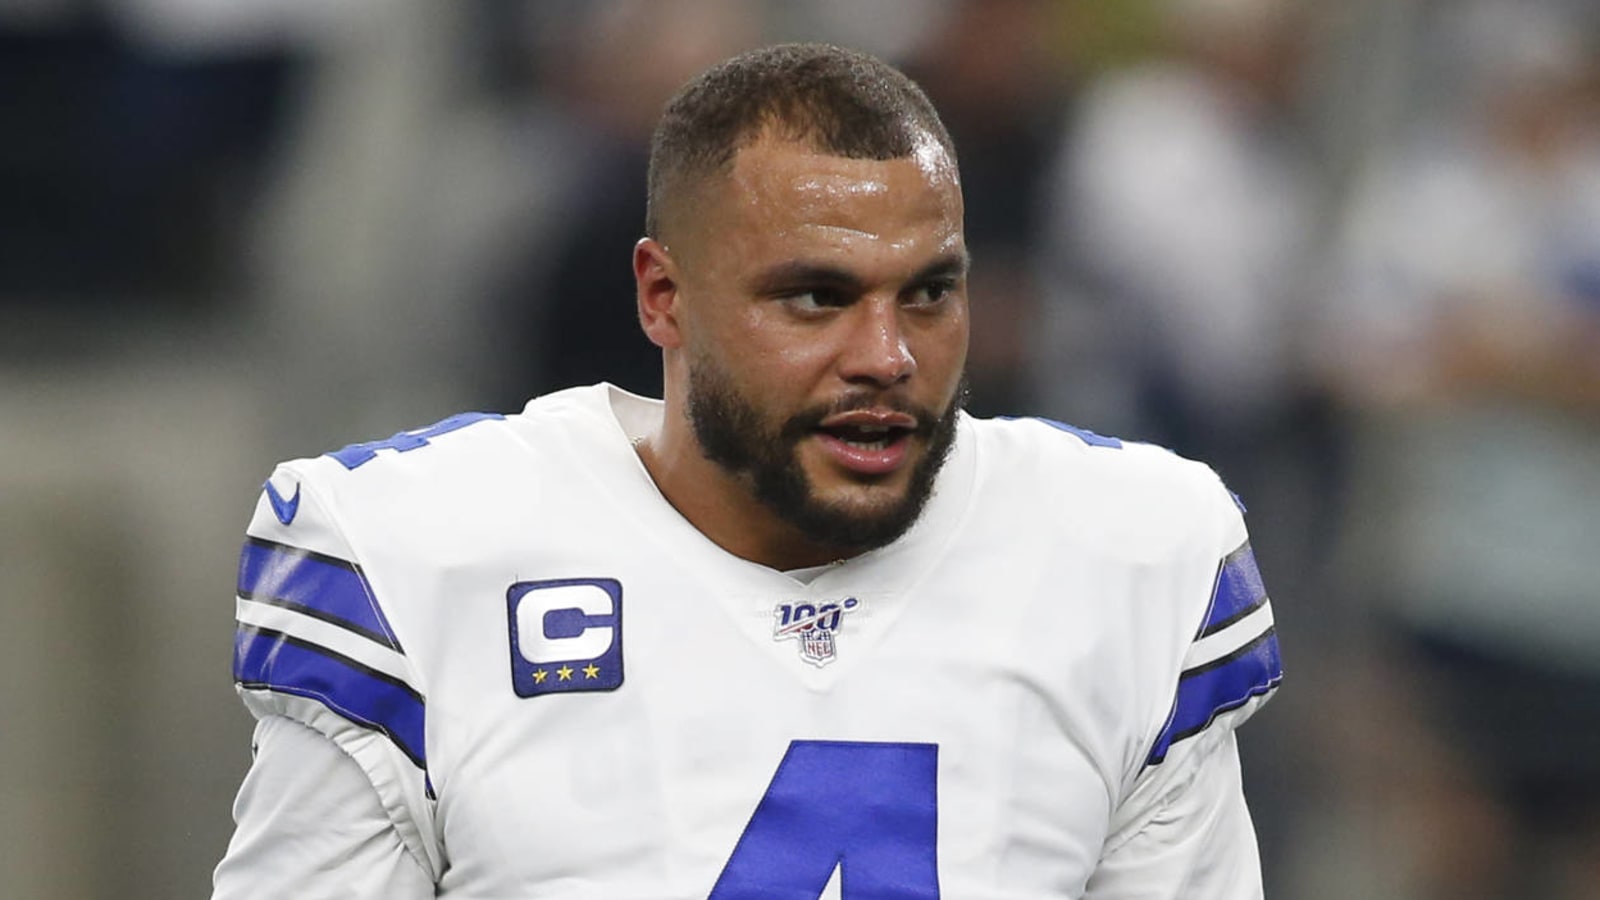 Dak Prescott dealt with anxiety, depression after brother's suicide